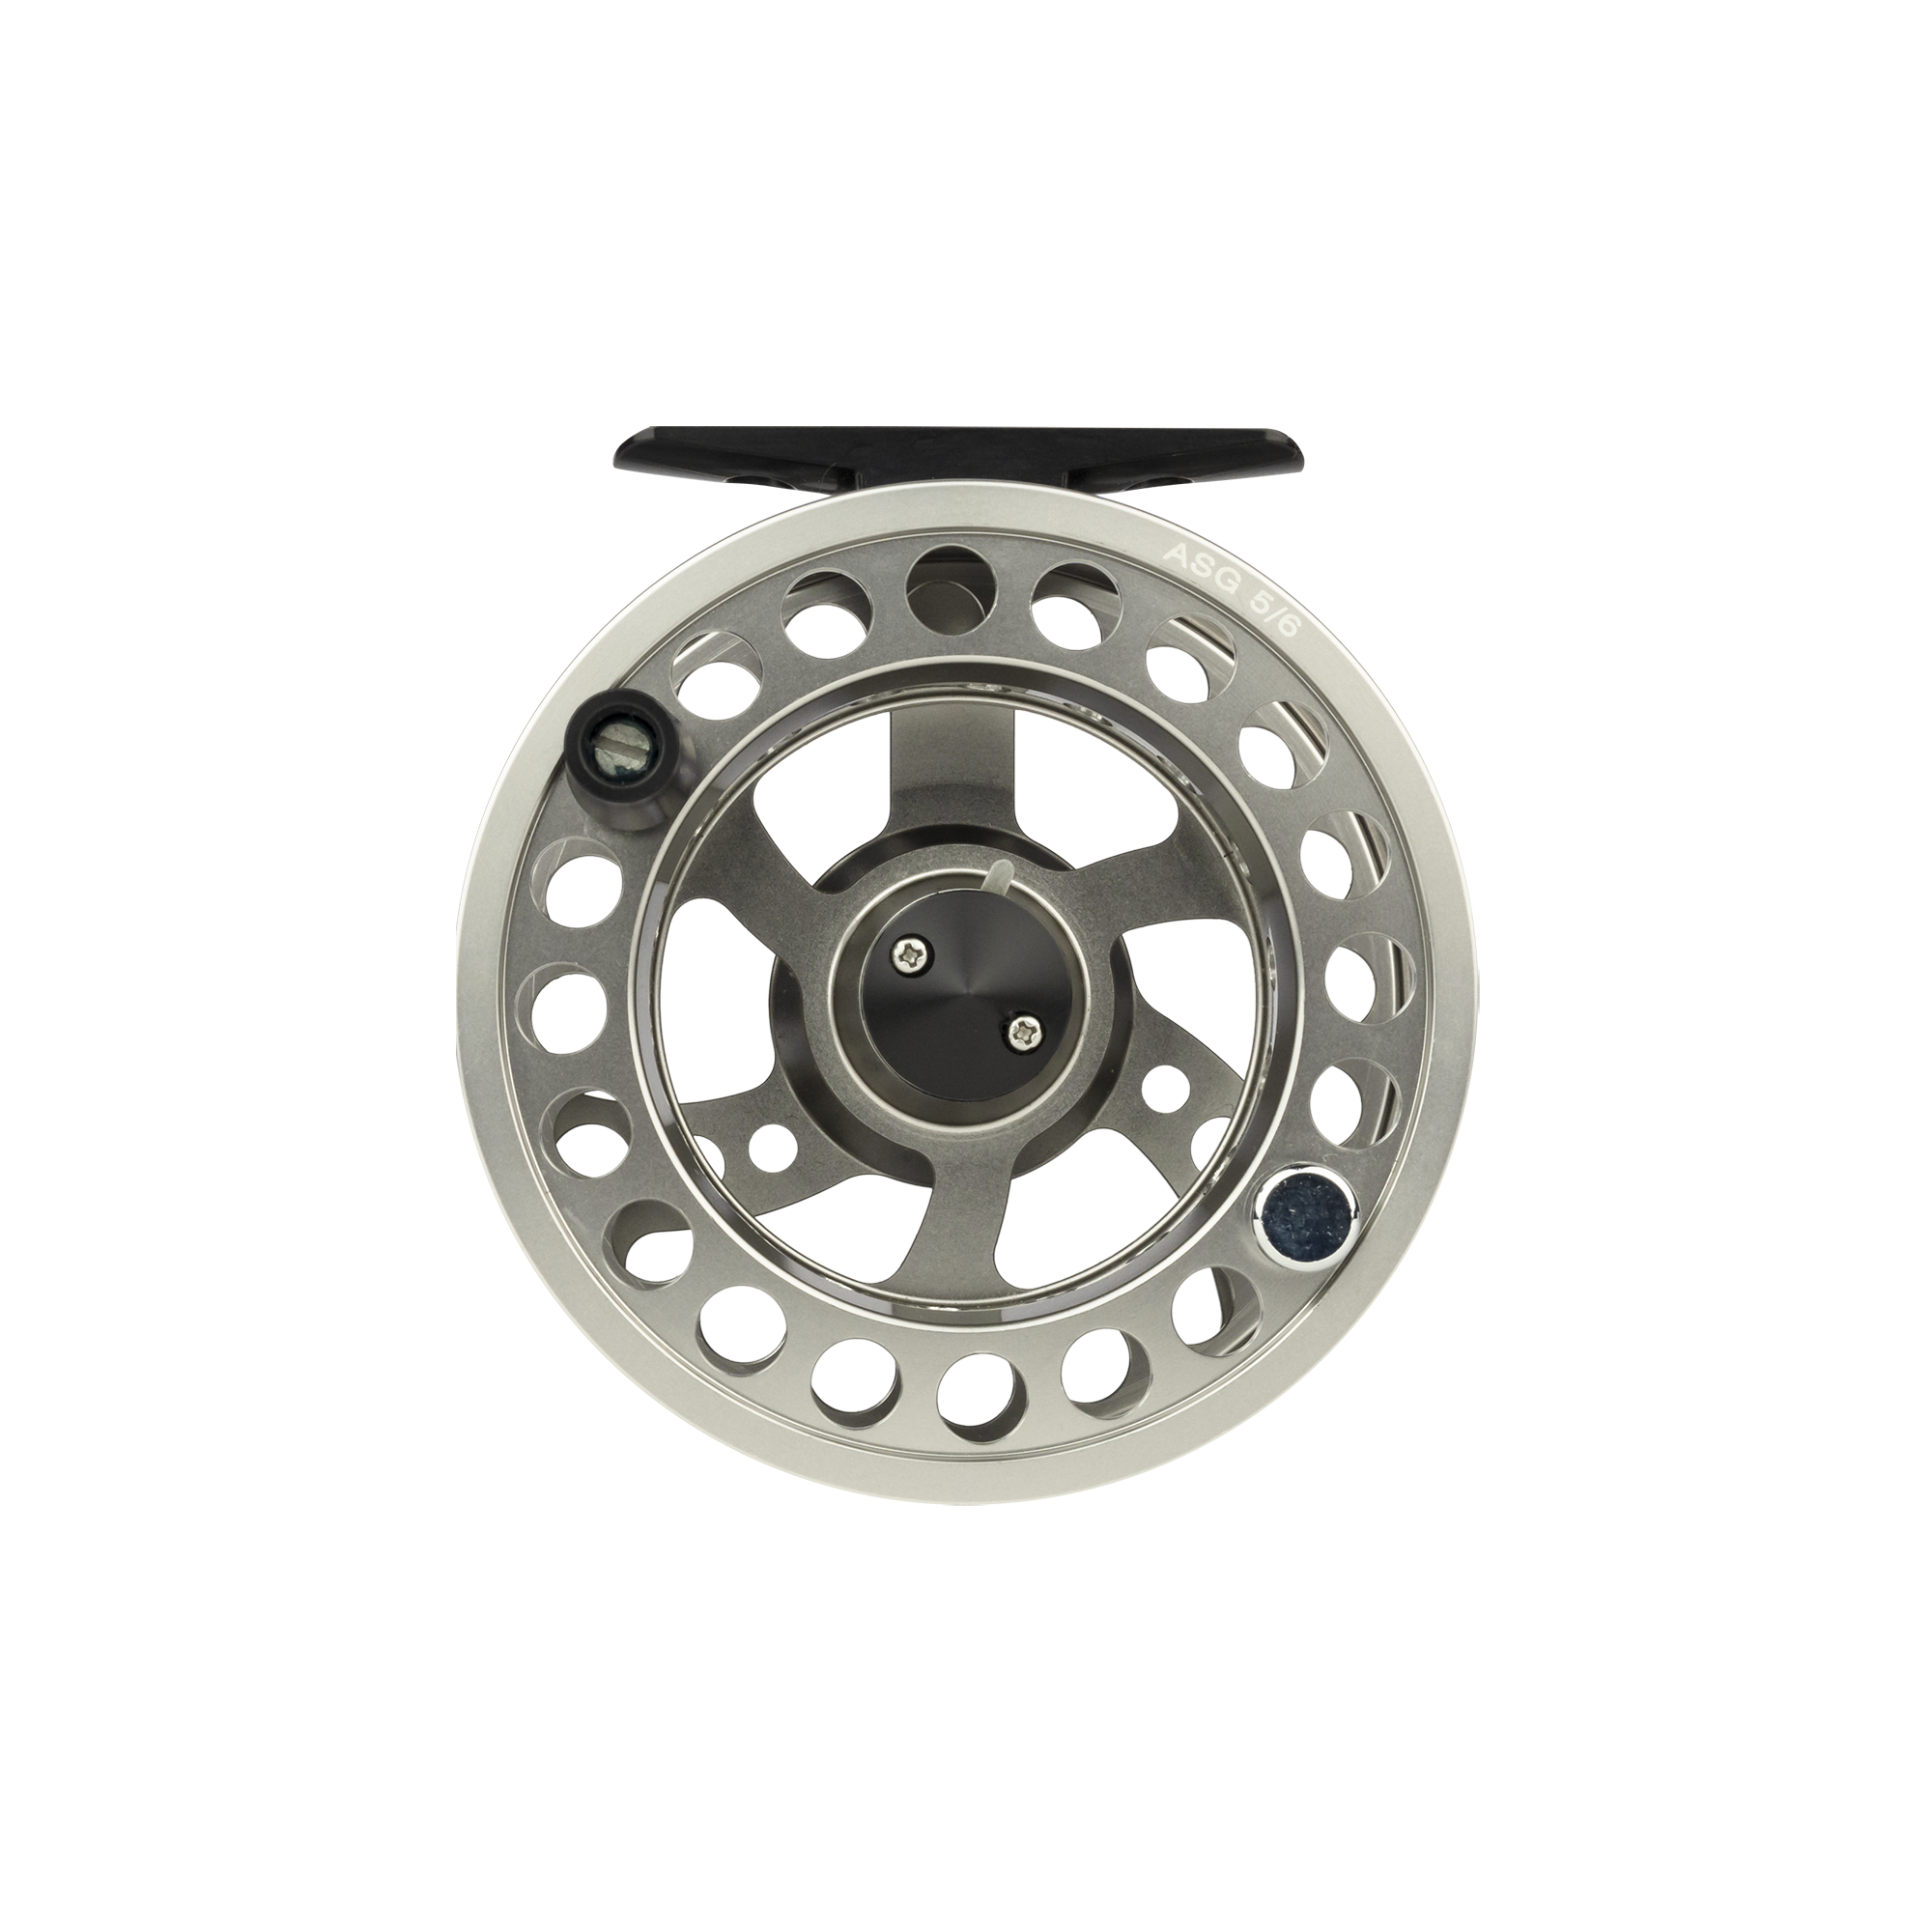 New Fly Reel with Rock Grain and Agate line Guard. (5/6 line wt